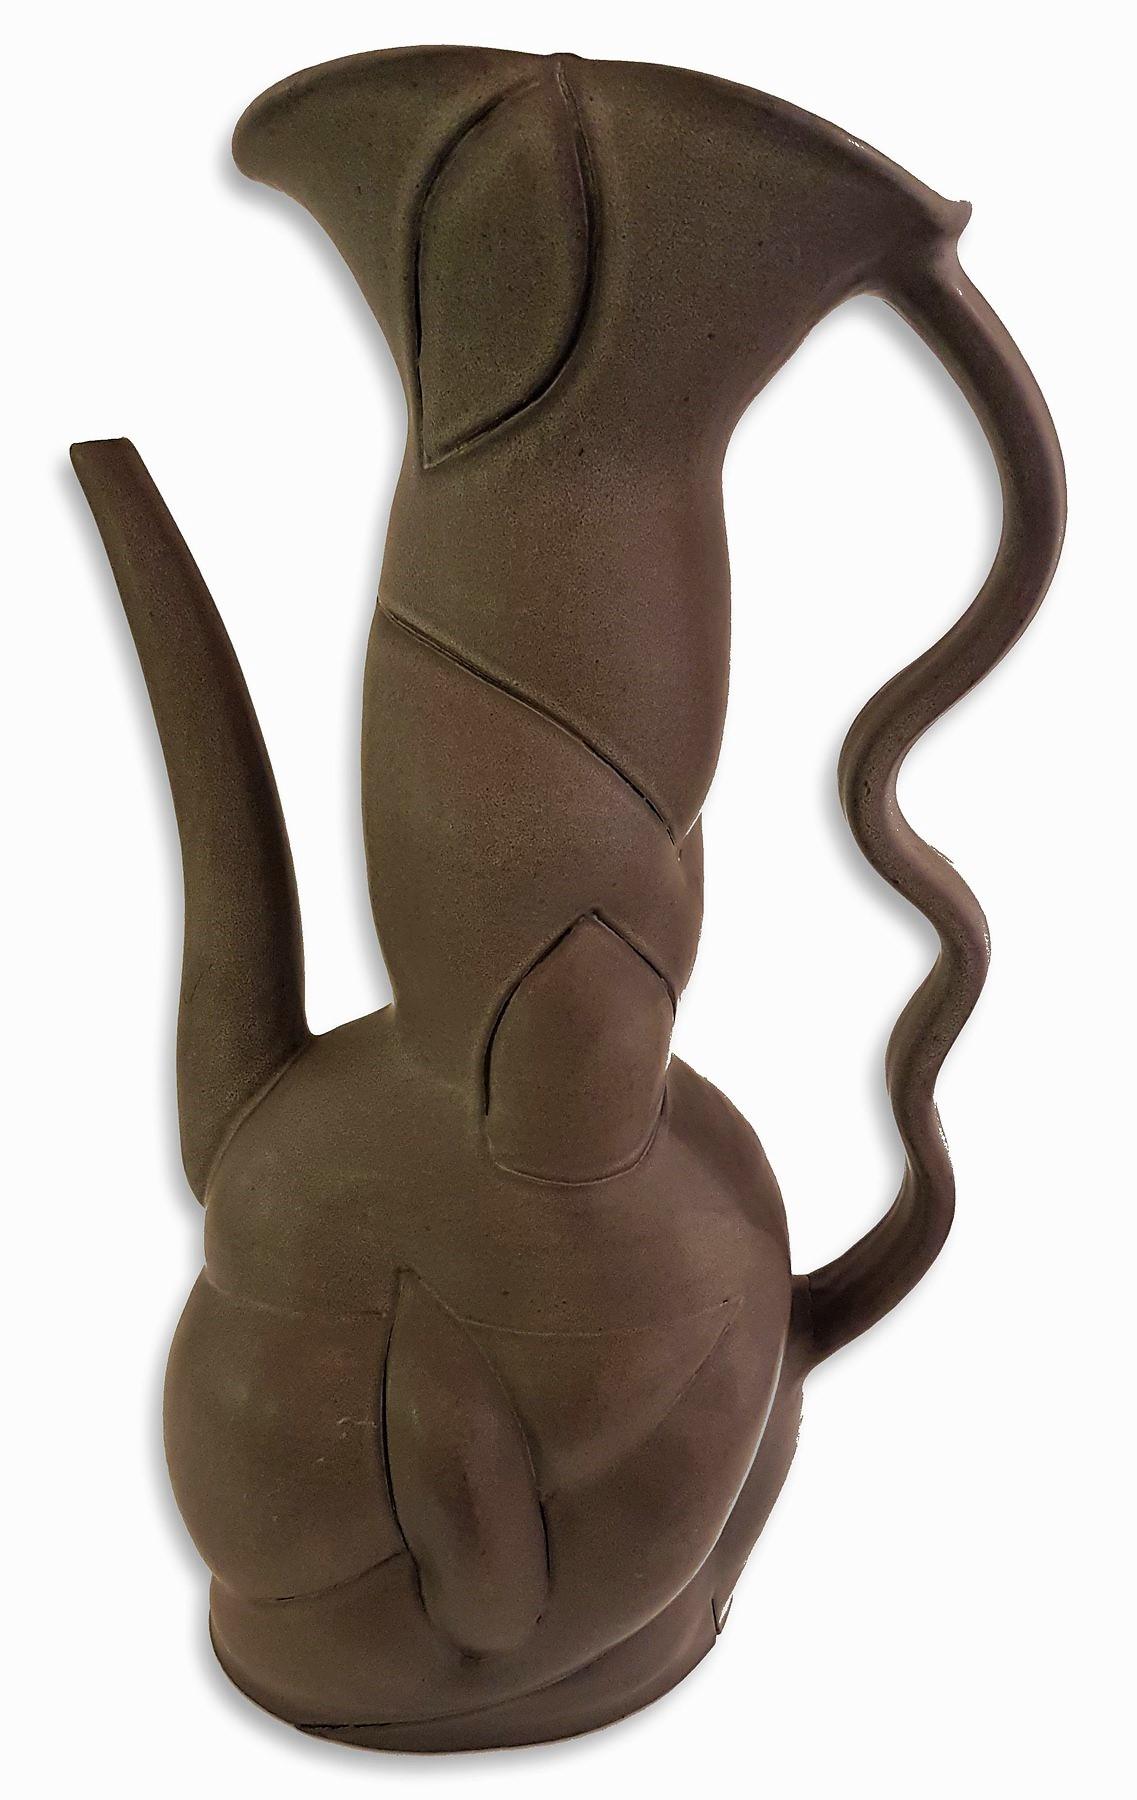 Untitled Pitcher - Black Abstract Sculpture by Chris Gustin